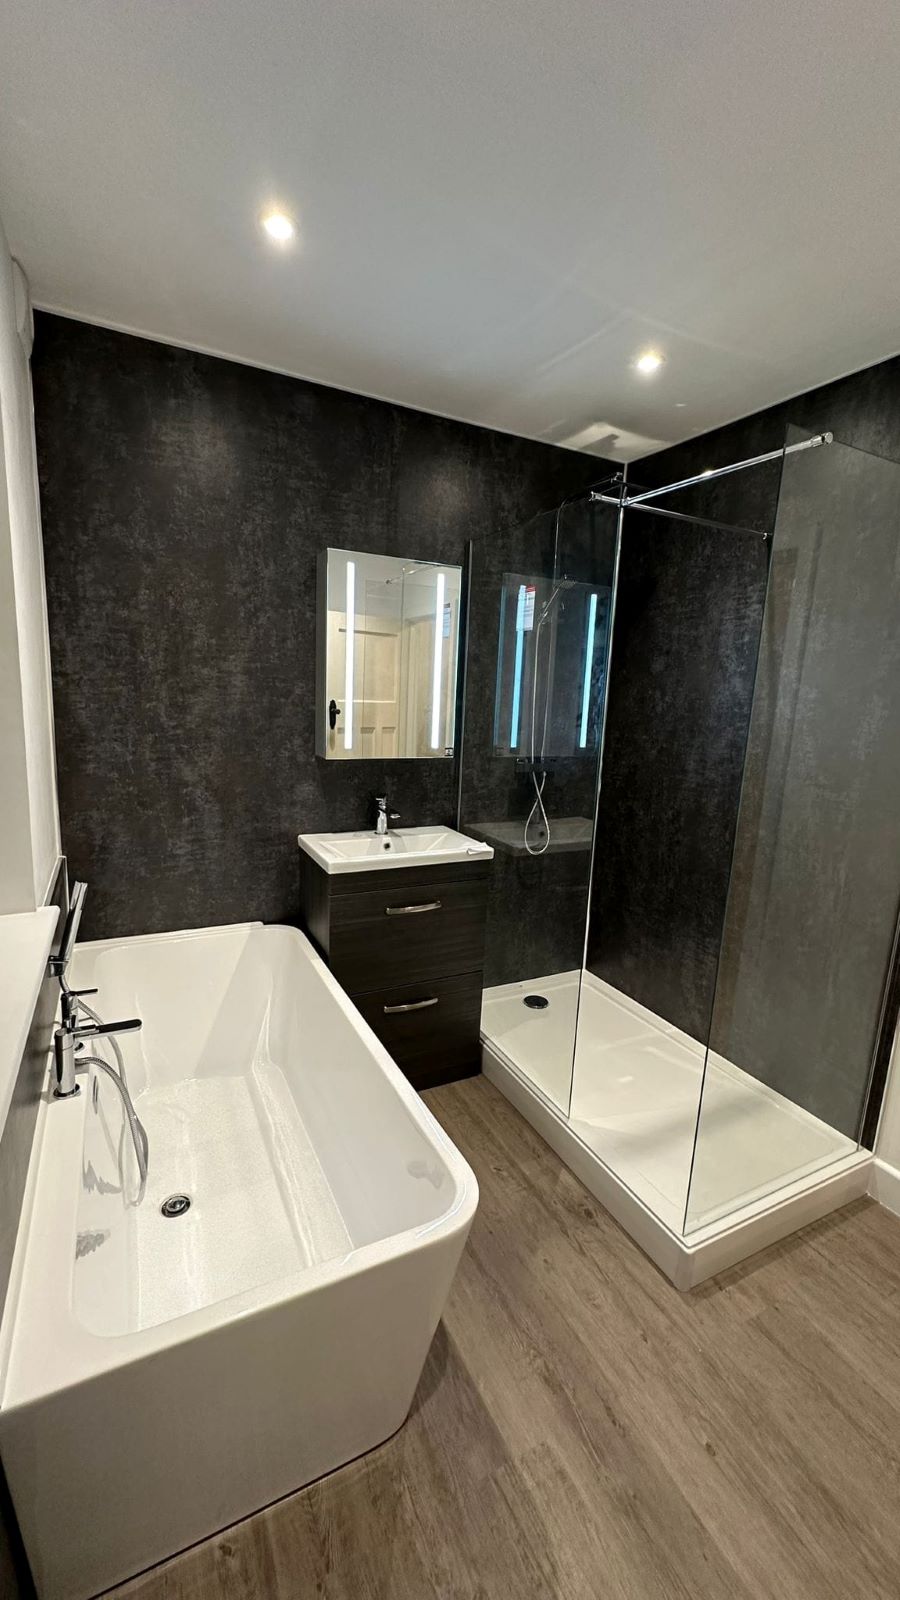 Another bathroom fit out and Wow! What a difference! 